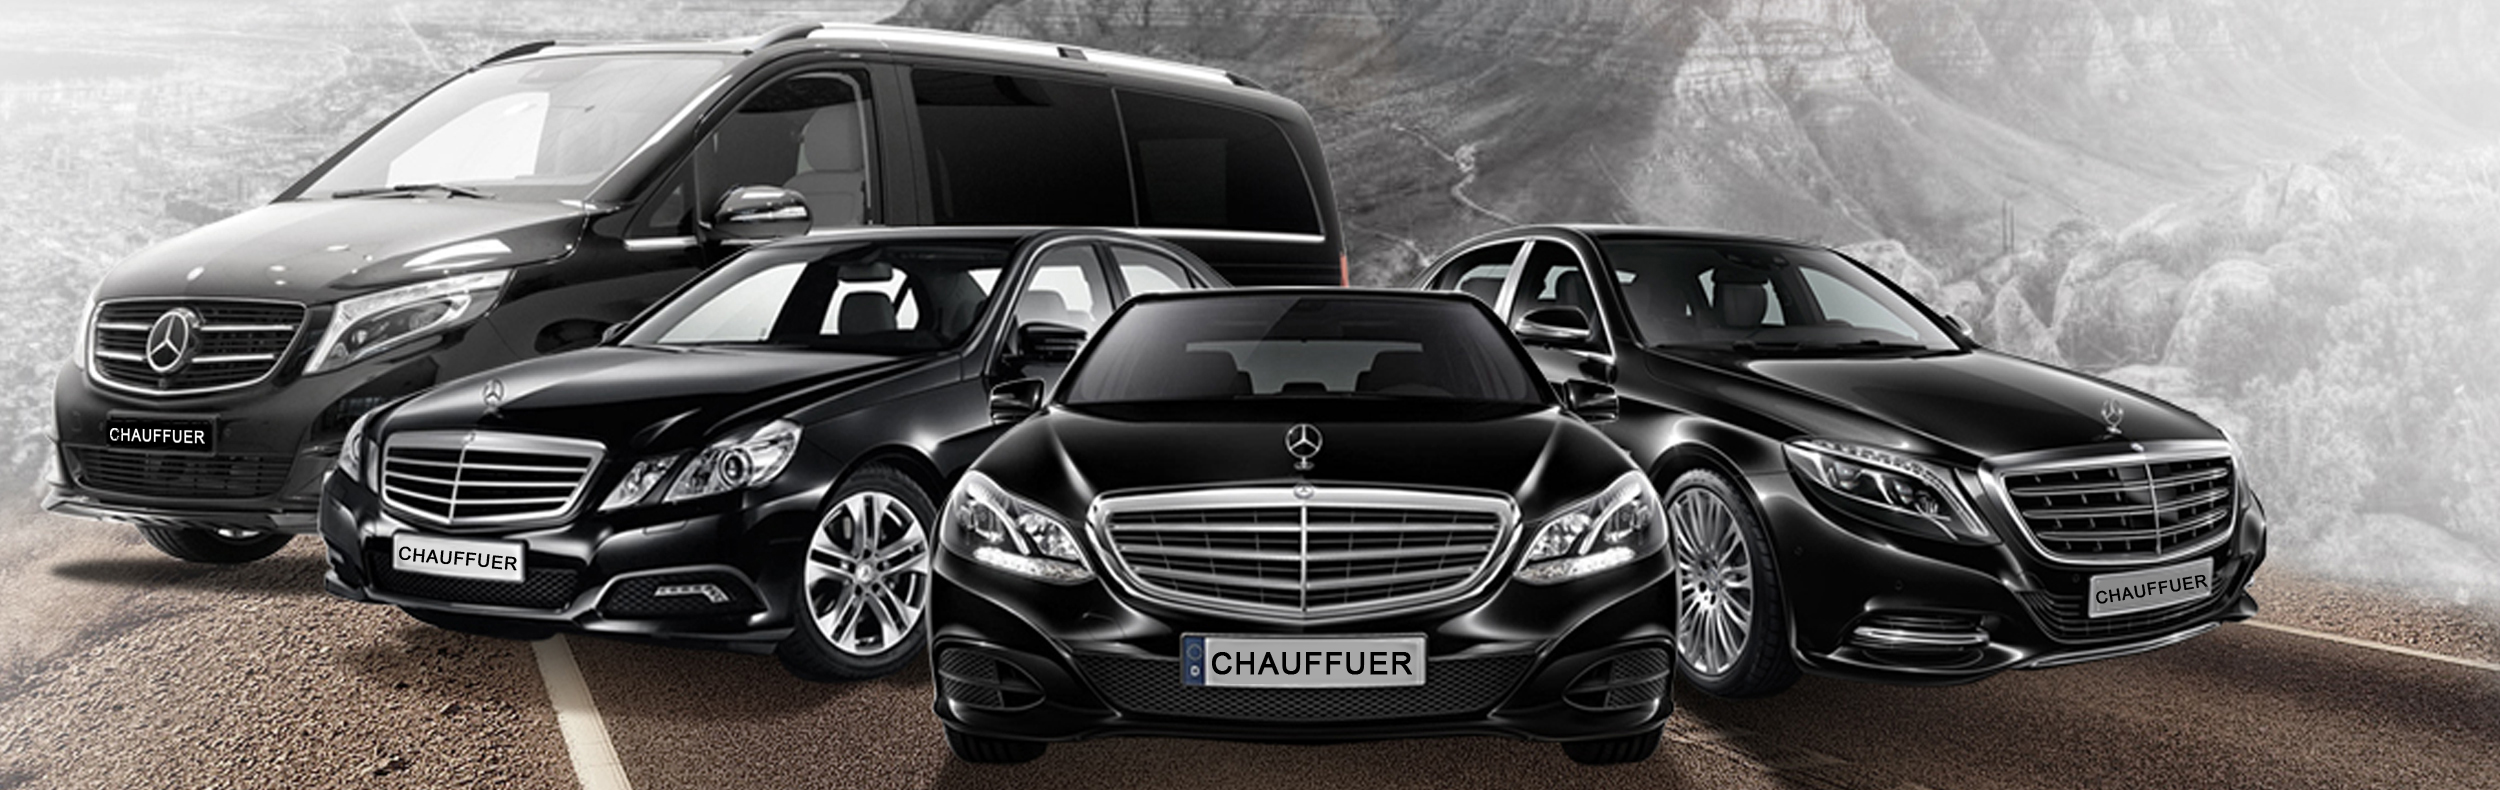 What to Look for When Choosing a Chauffeur Service in Belfast